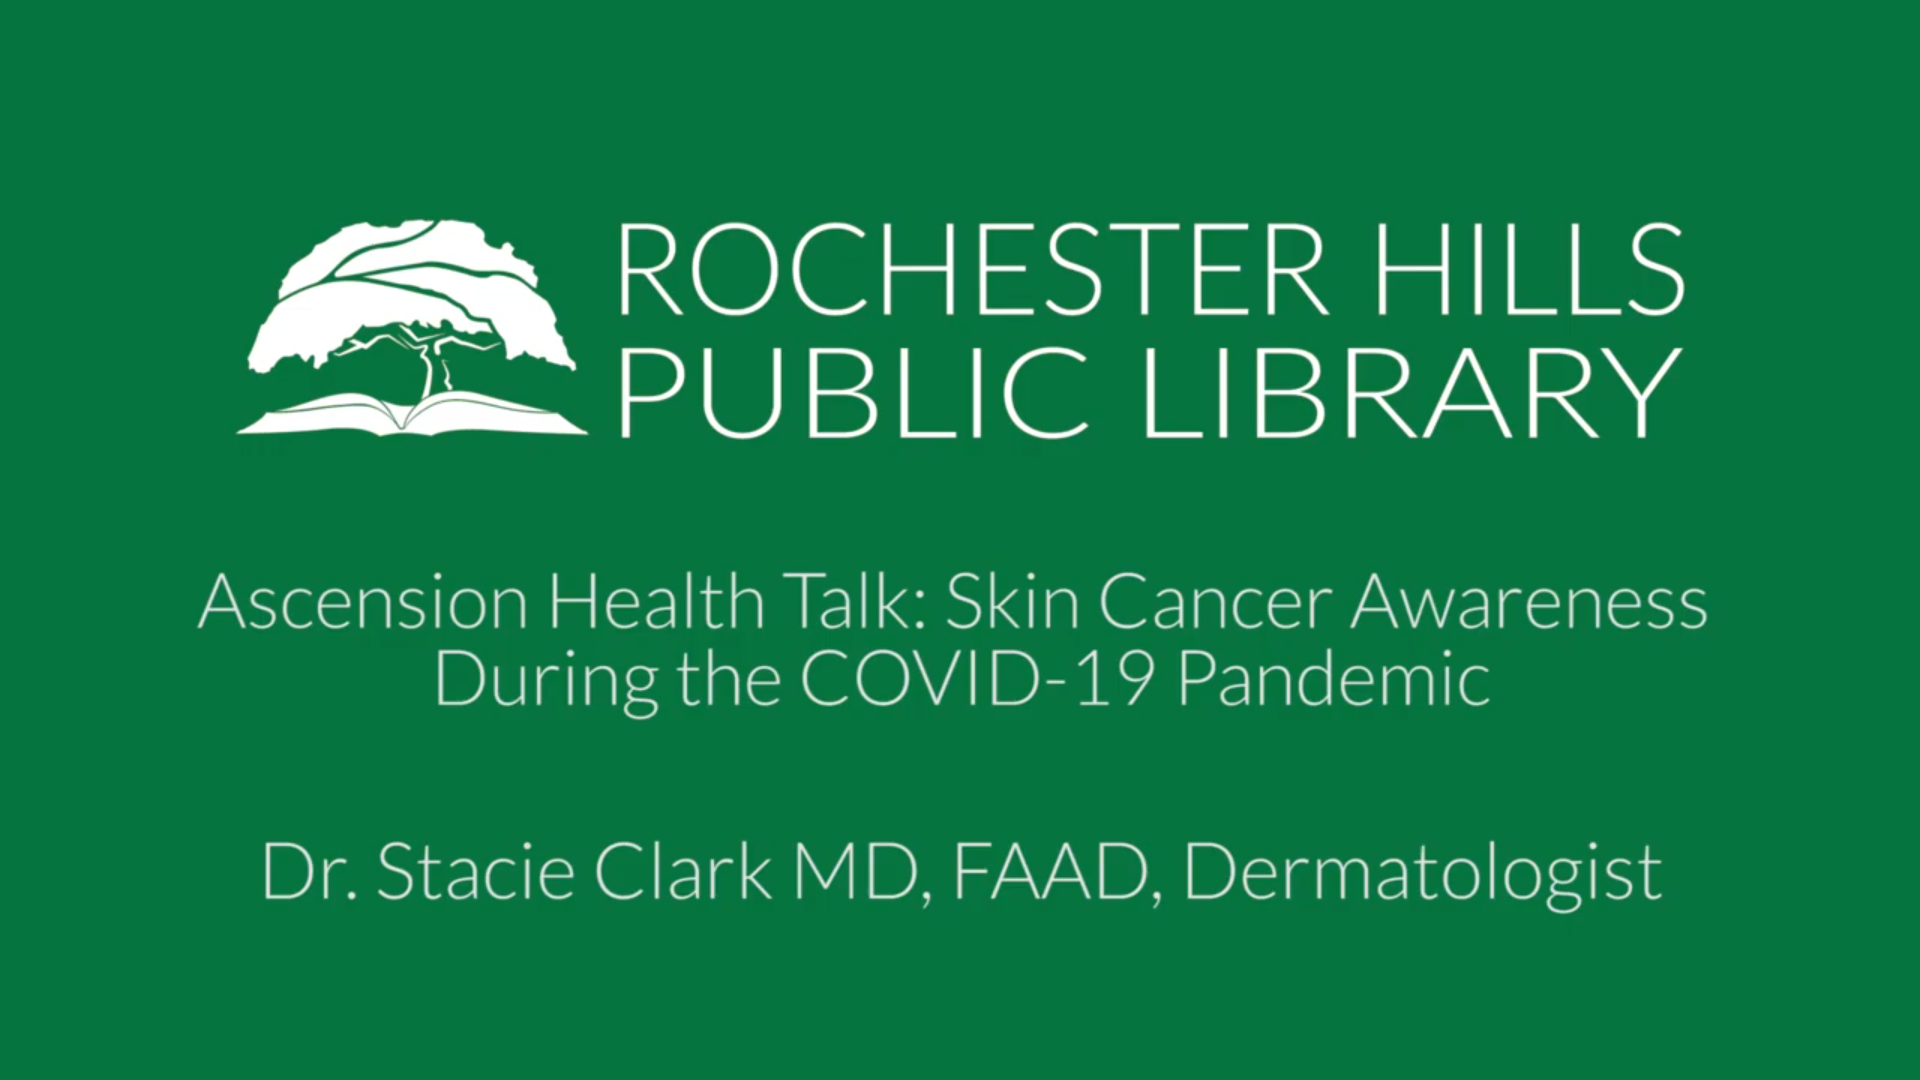 Ascension Health Talk: Skin Cancer Awareness During the COVID-19 Pandemic